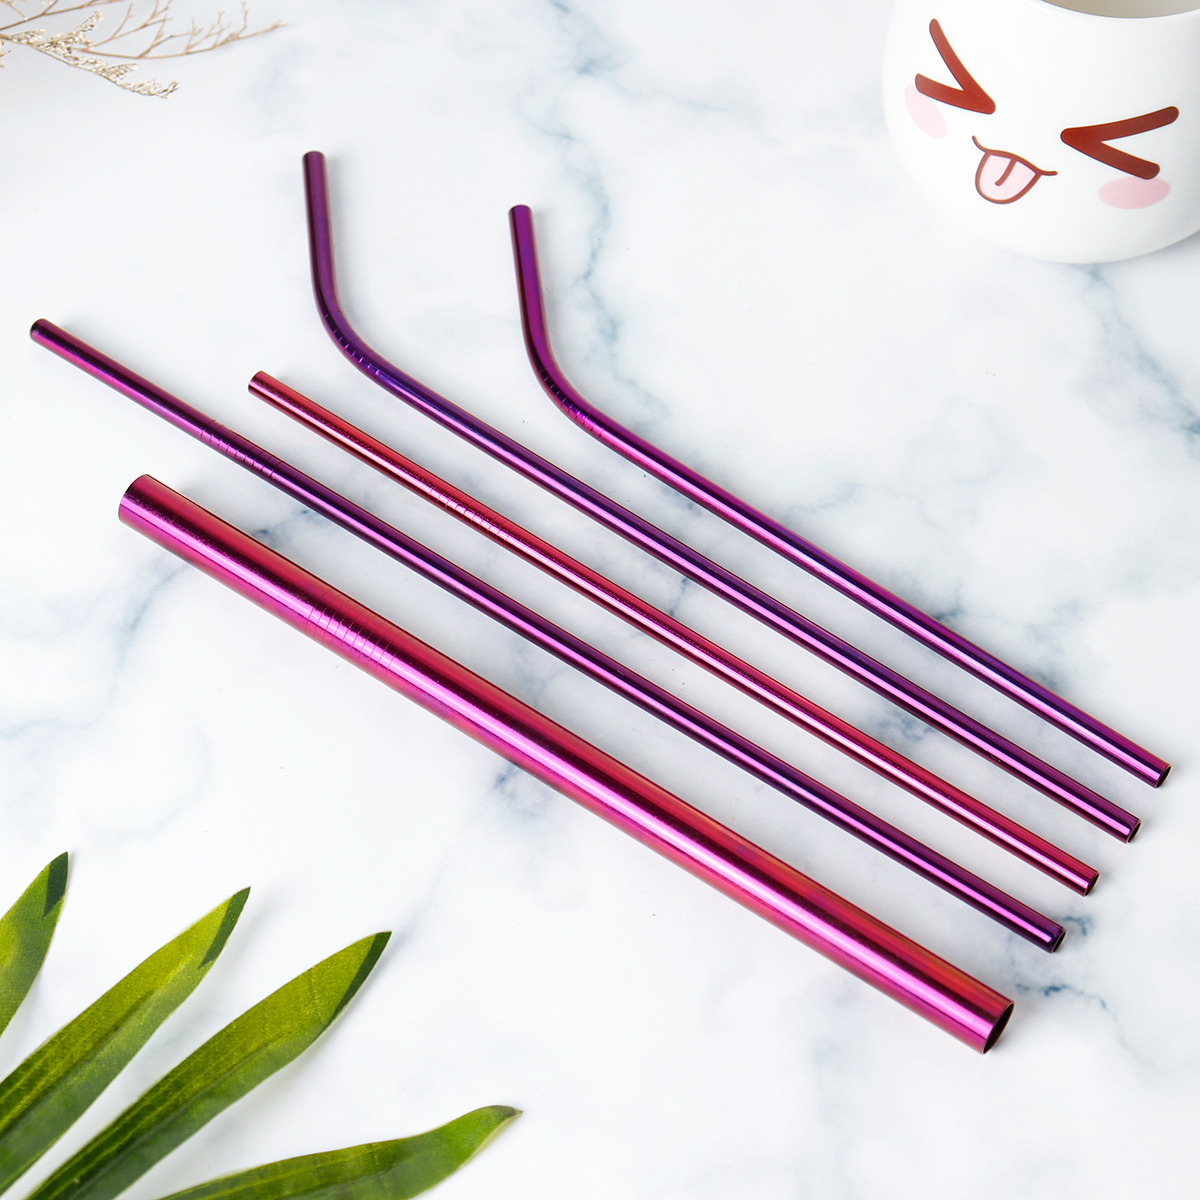 Portable-Metal-Straw-Set-304-Stainless-Steel-Straws-Reusable-Metal-Drinking-Straws-With-Cleaning-Bru-1532046-9